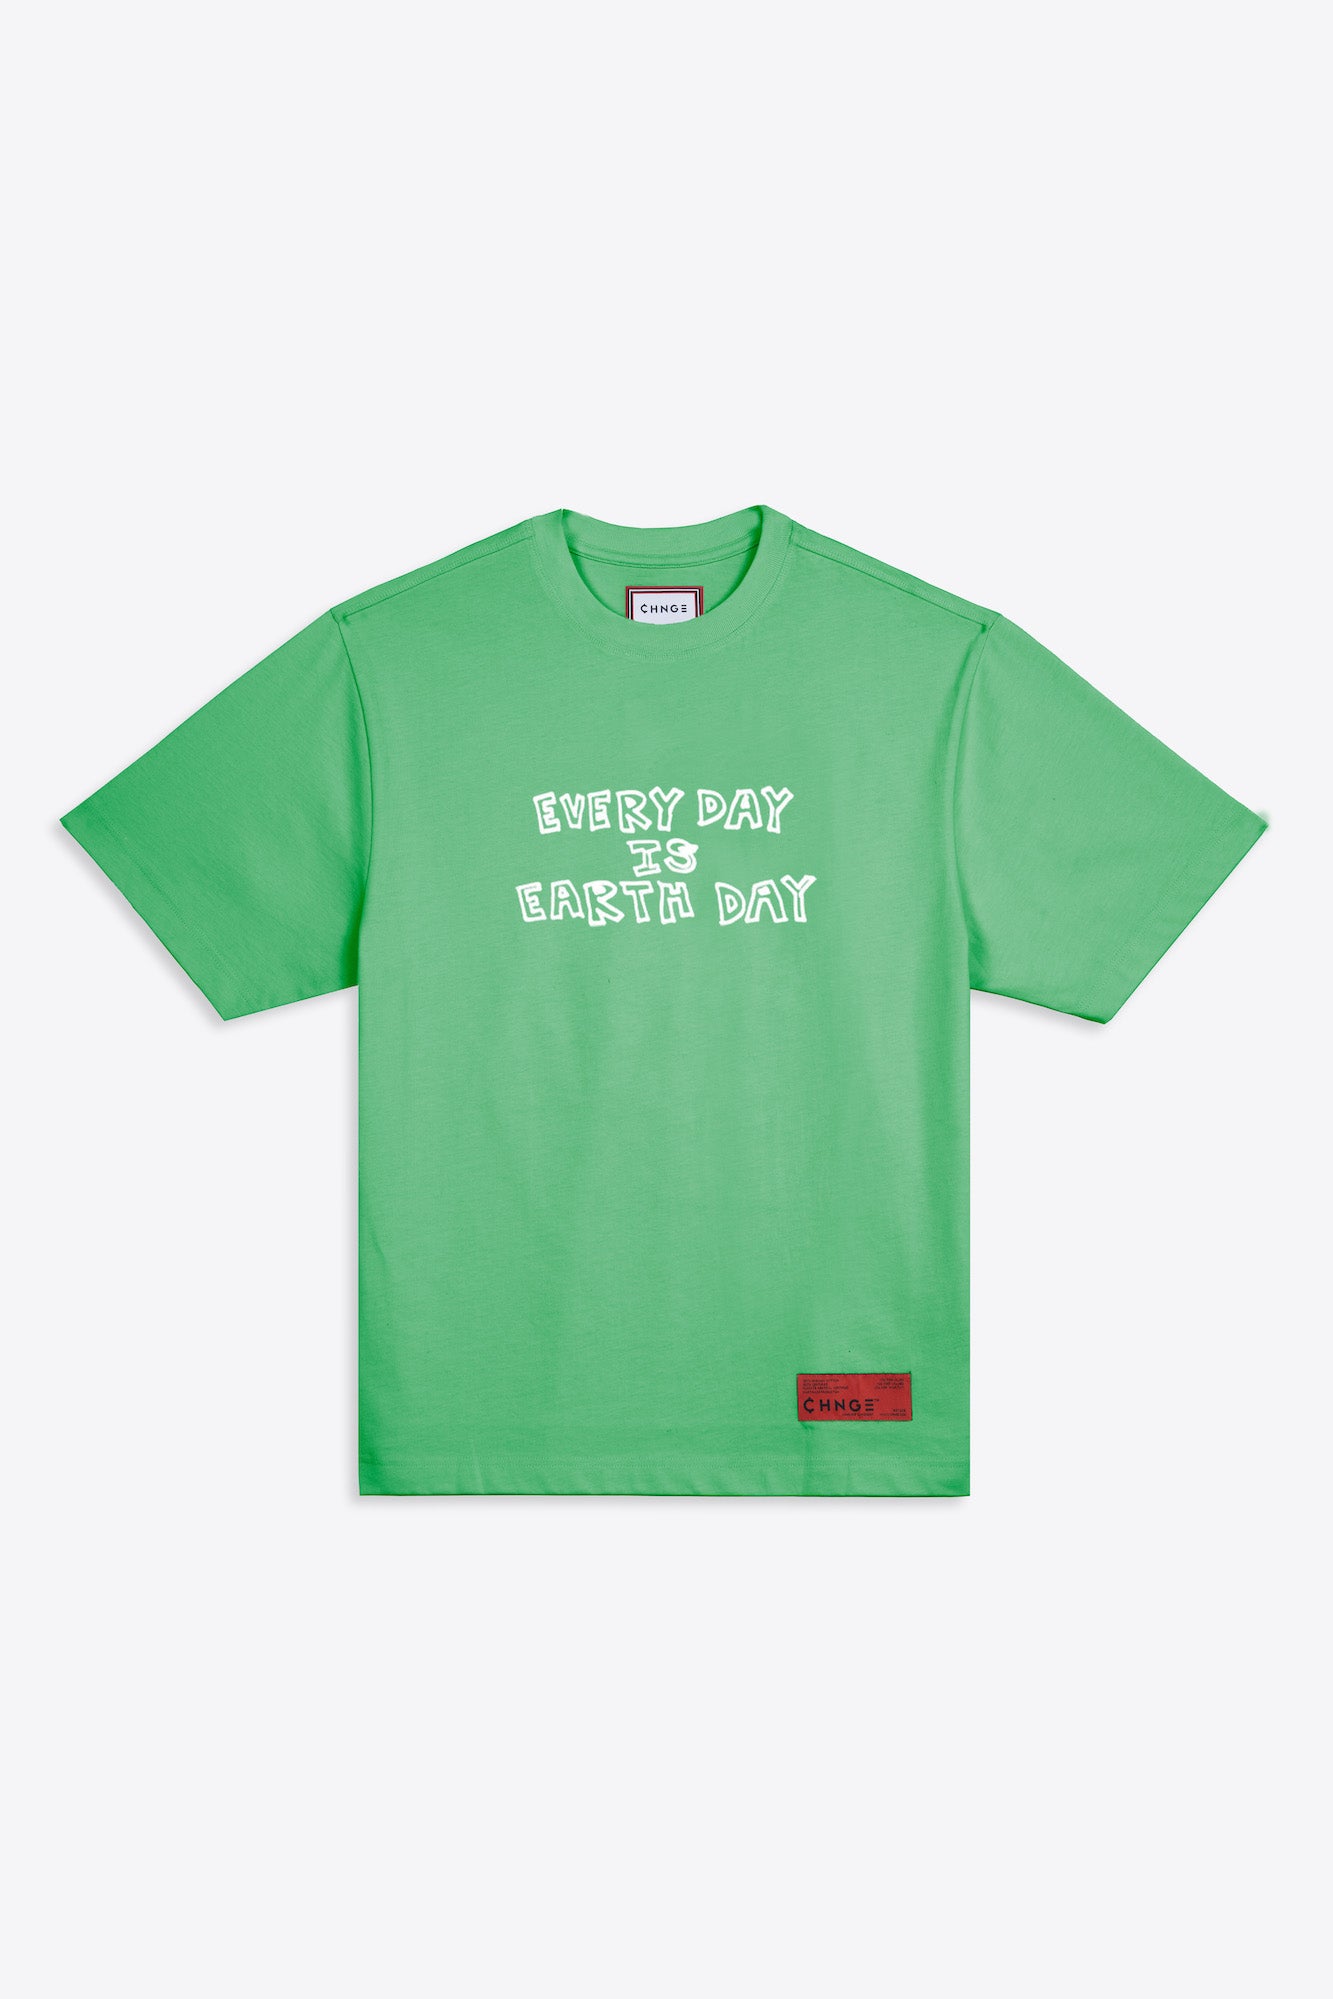 S/S (Kelly Earth Day Green) Day $42 Every T-Shirt